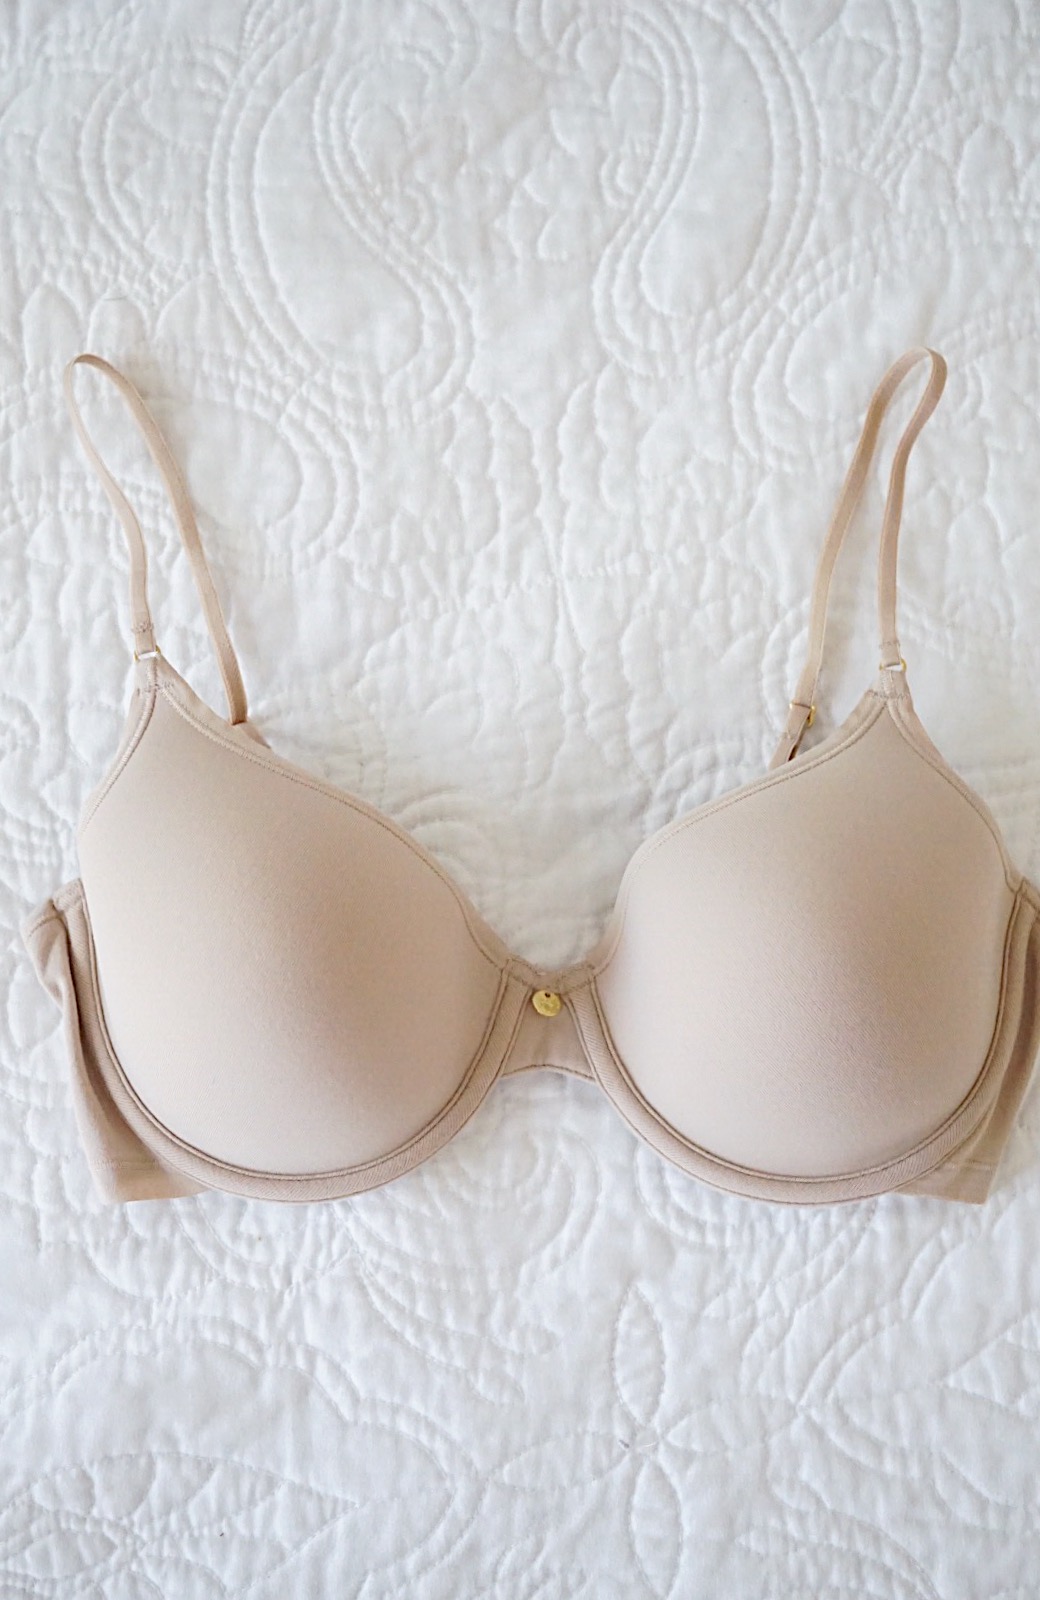 Best bras for everyday - The BEST Everyday Bra featured by popular Texas fashion blogger Style Your Senses